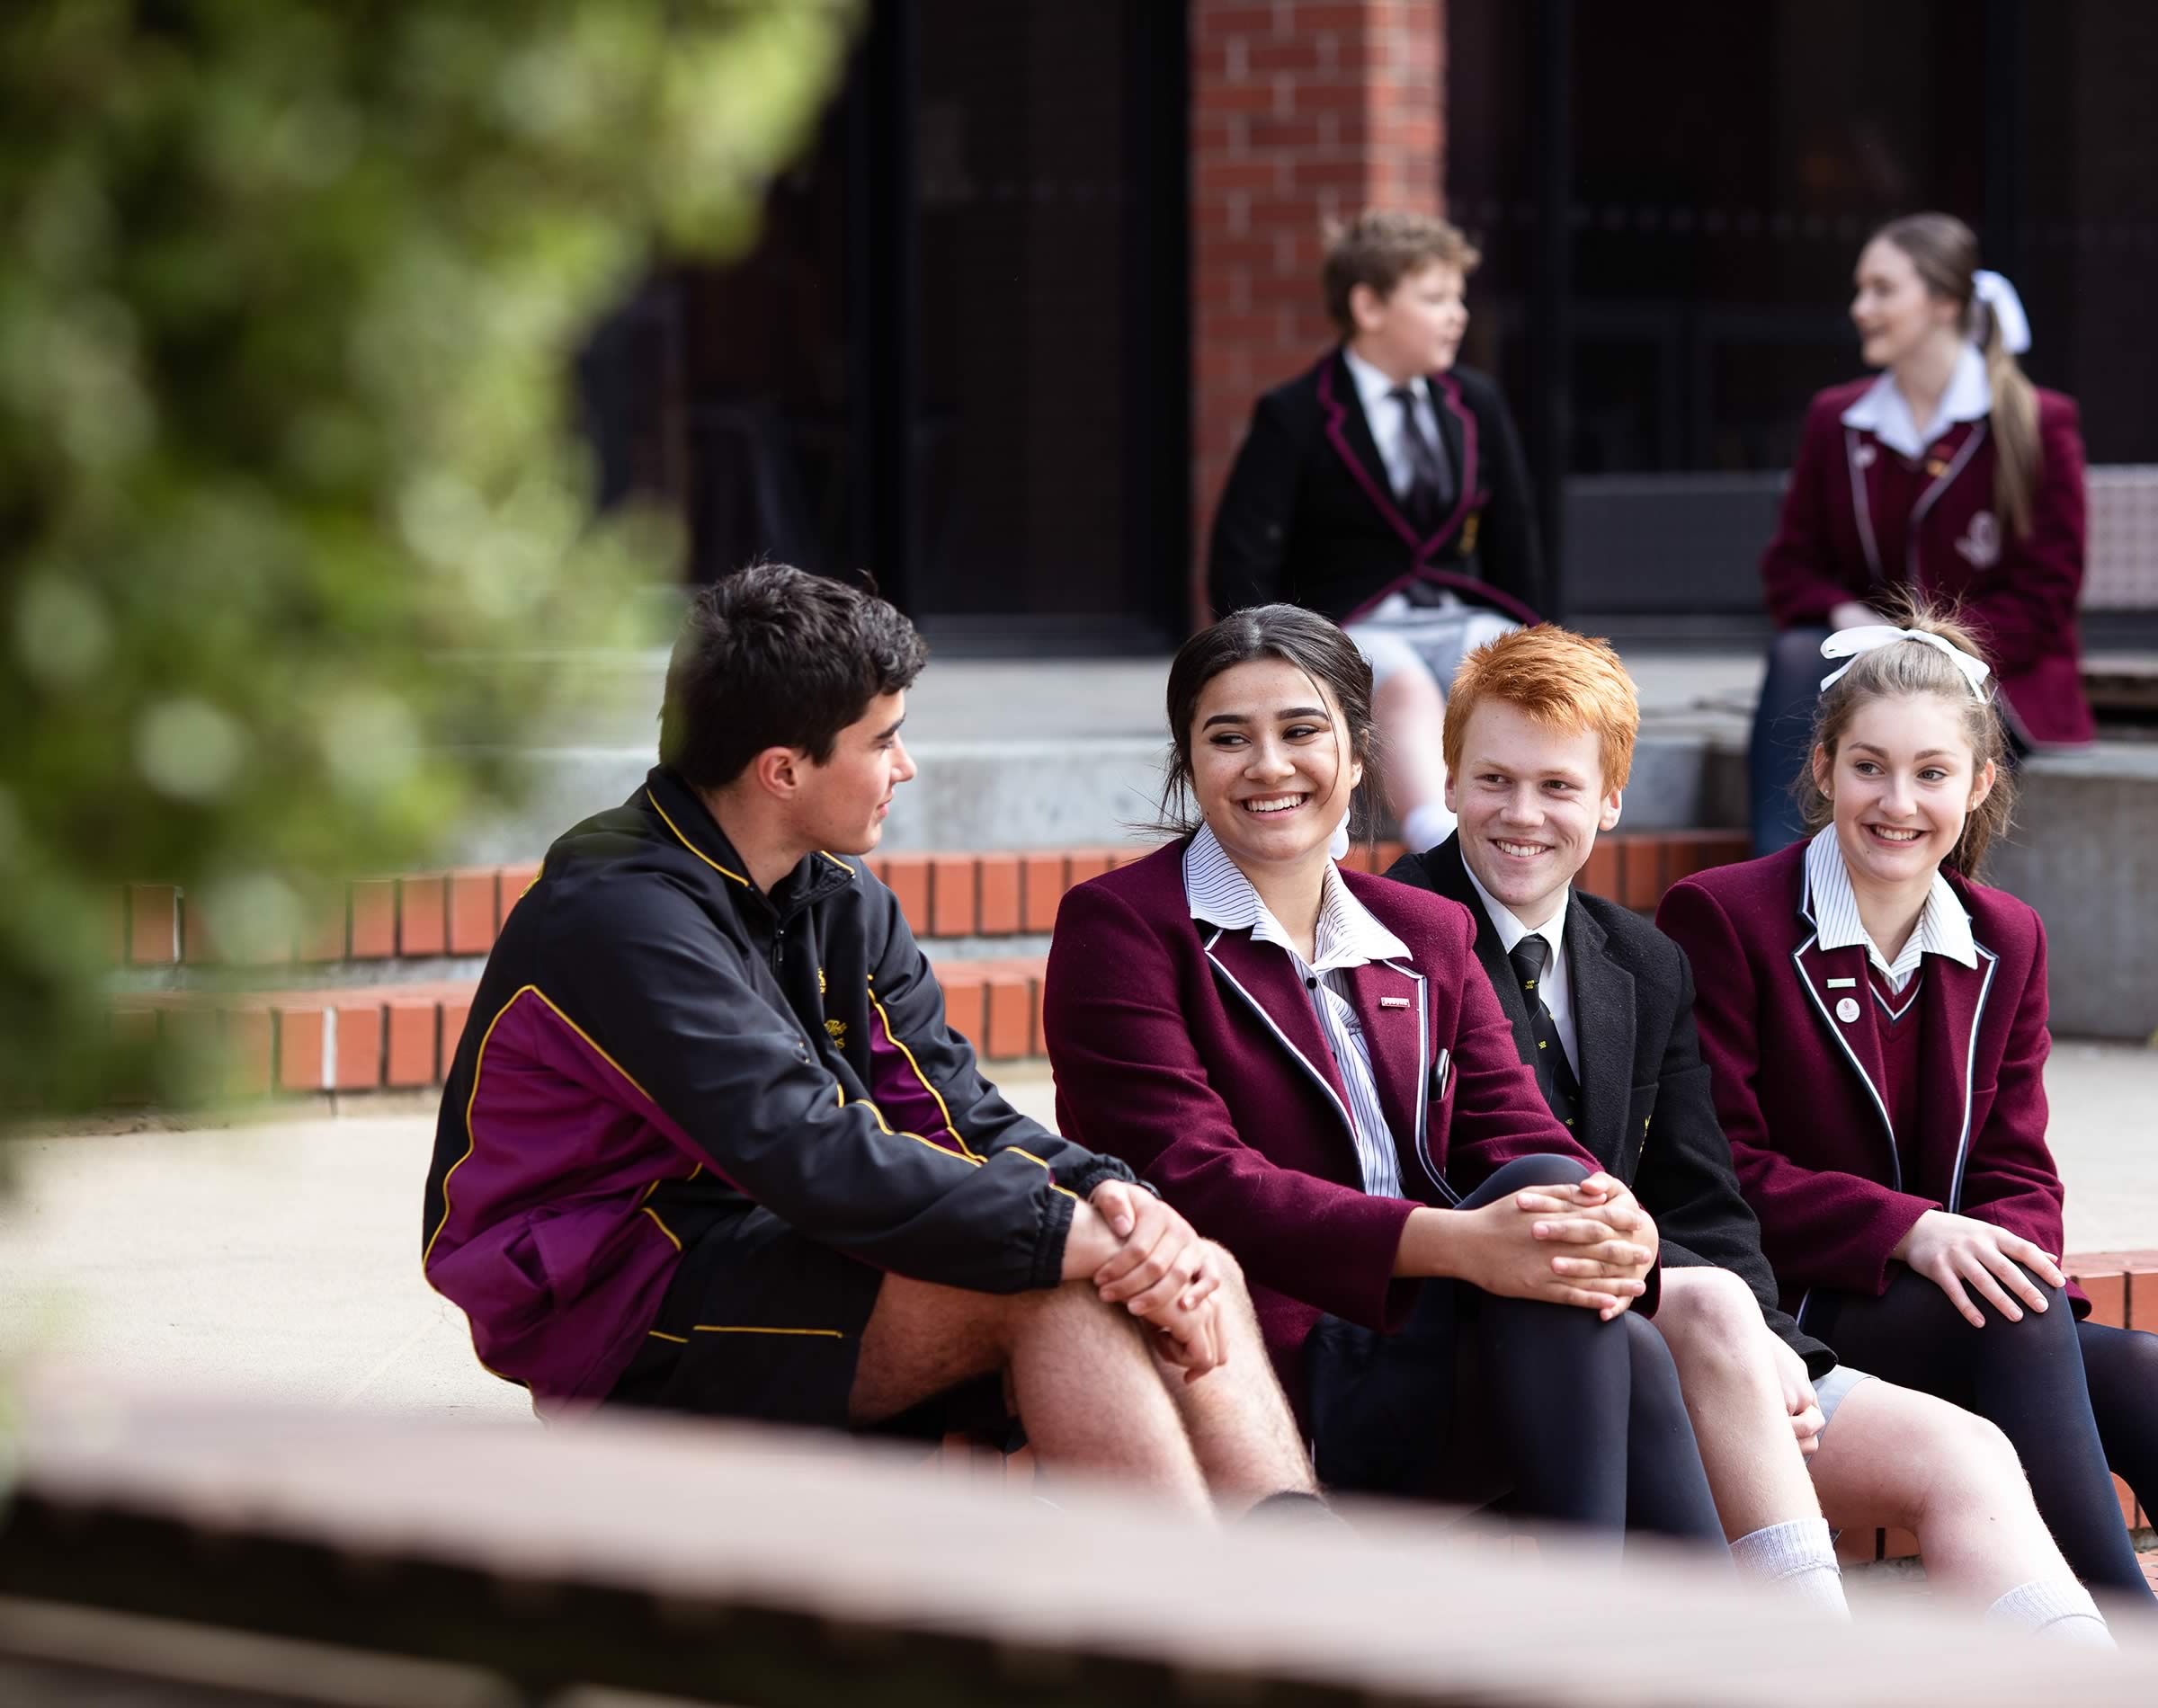 St Michael’s Collegiate and The Hutchins School students chatting in the Senior School Quad. Image: Joshua Lamont.